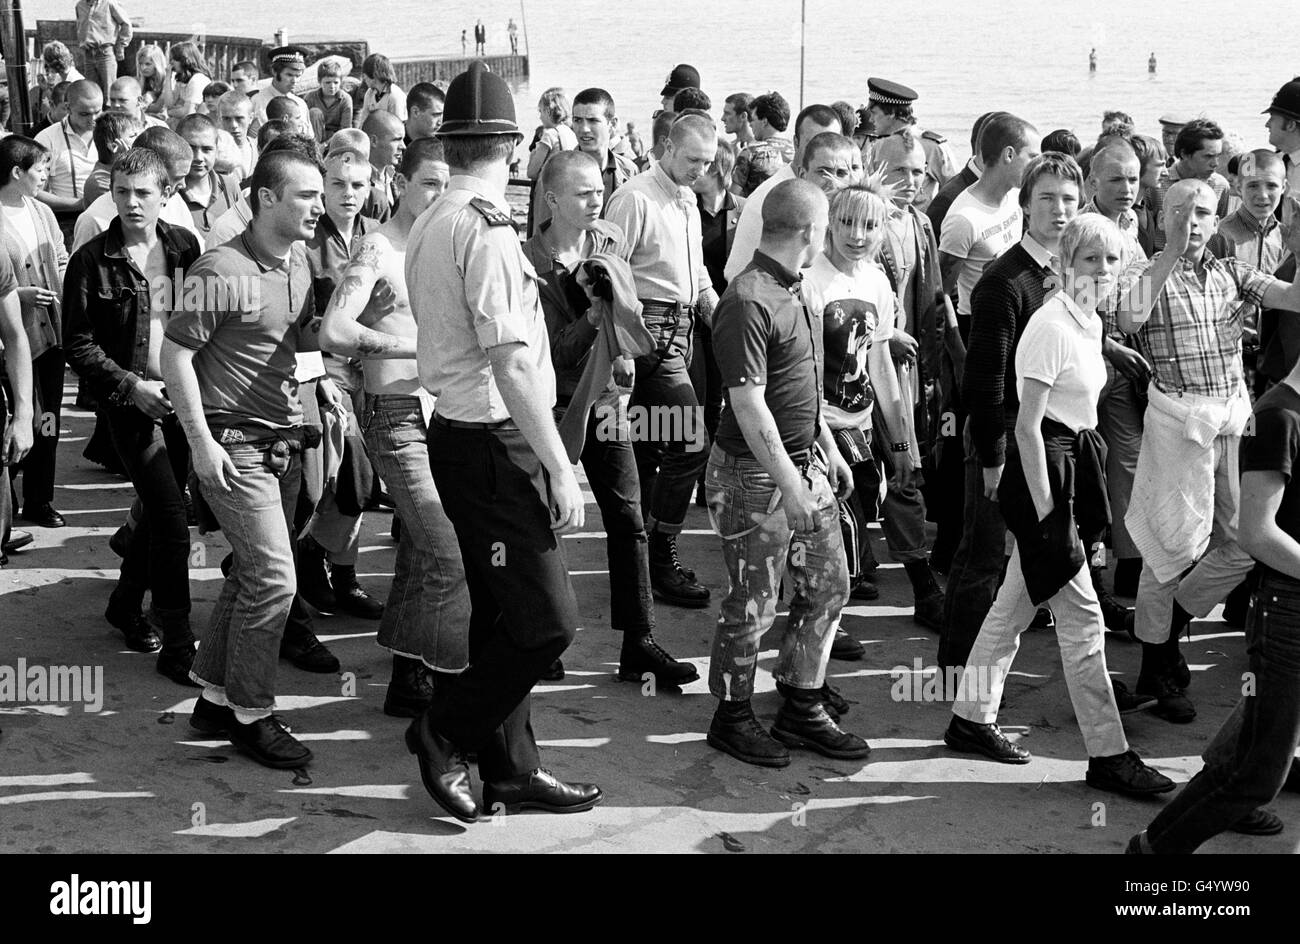 Law and Order - Gangs - Skinheads - Southend-on-Sea - 1980 Stock Photo